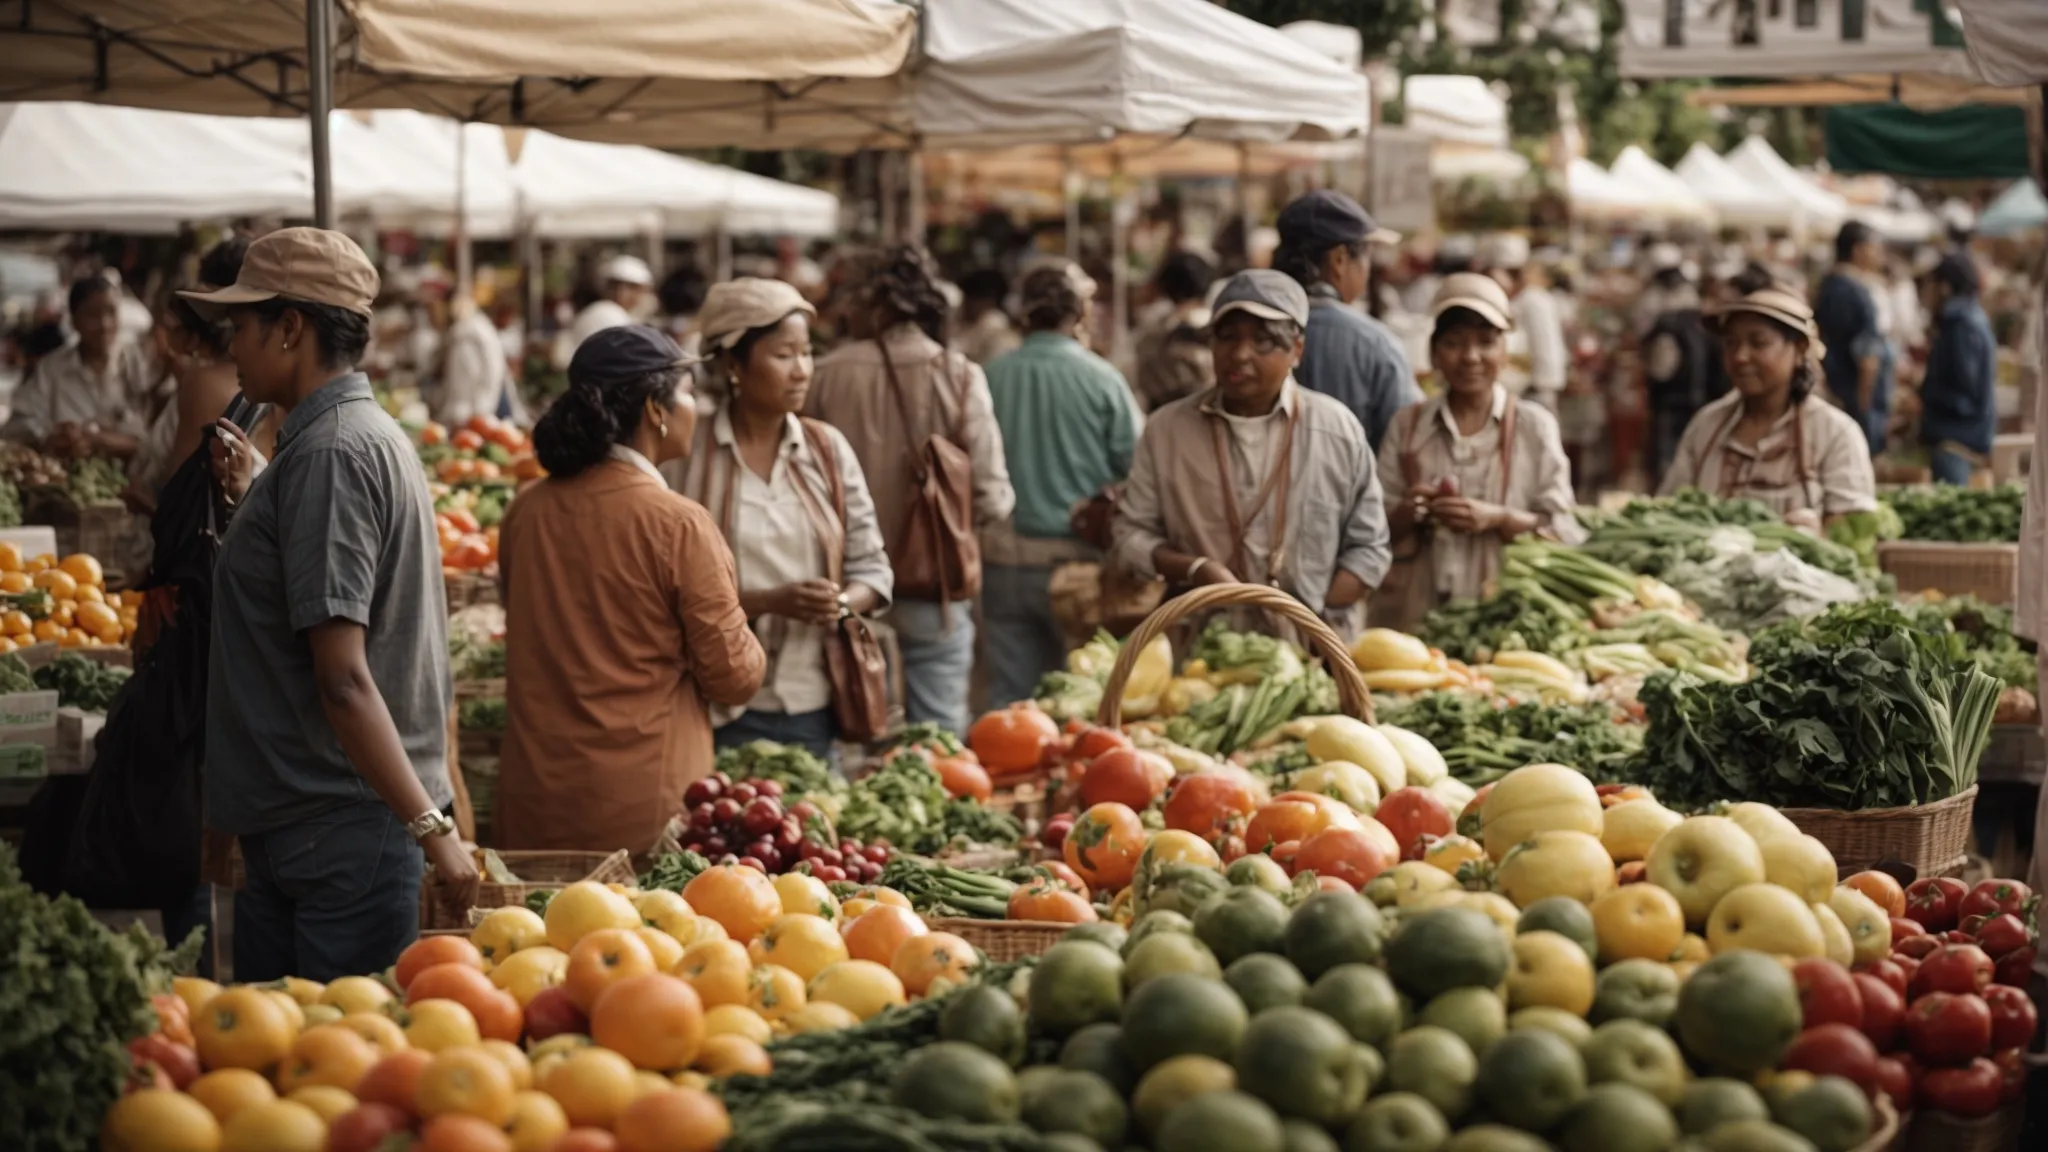 a bustling farmer's market with fresh produce and local vendors engaging with community members.